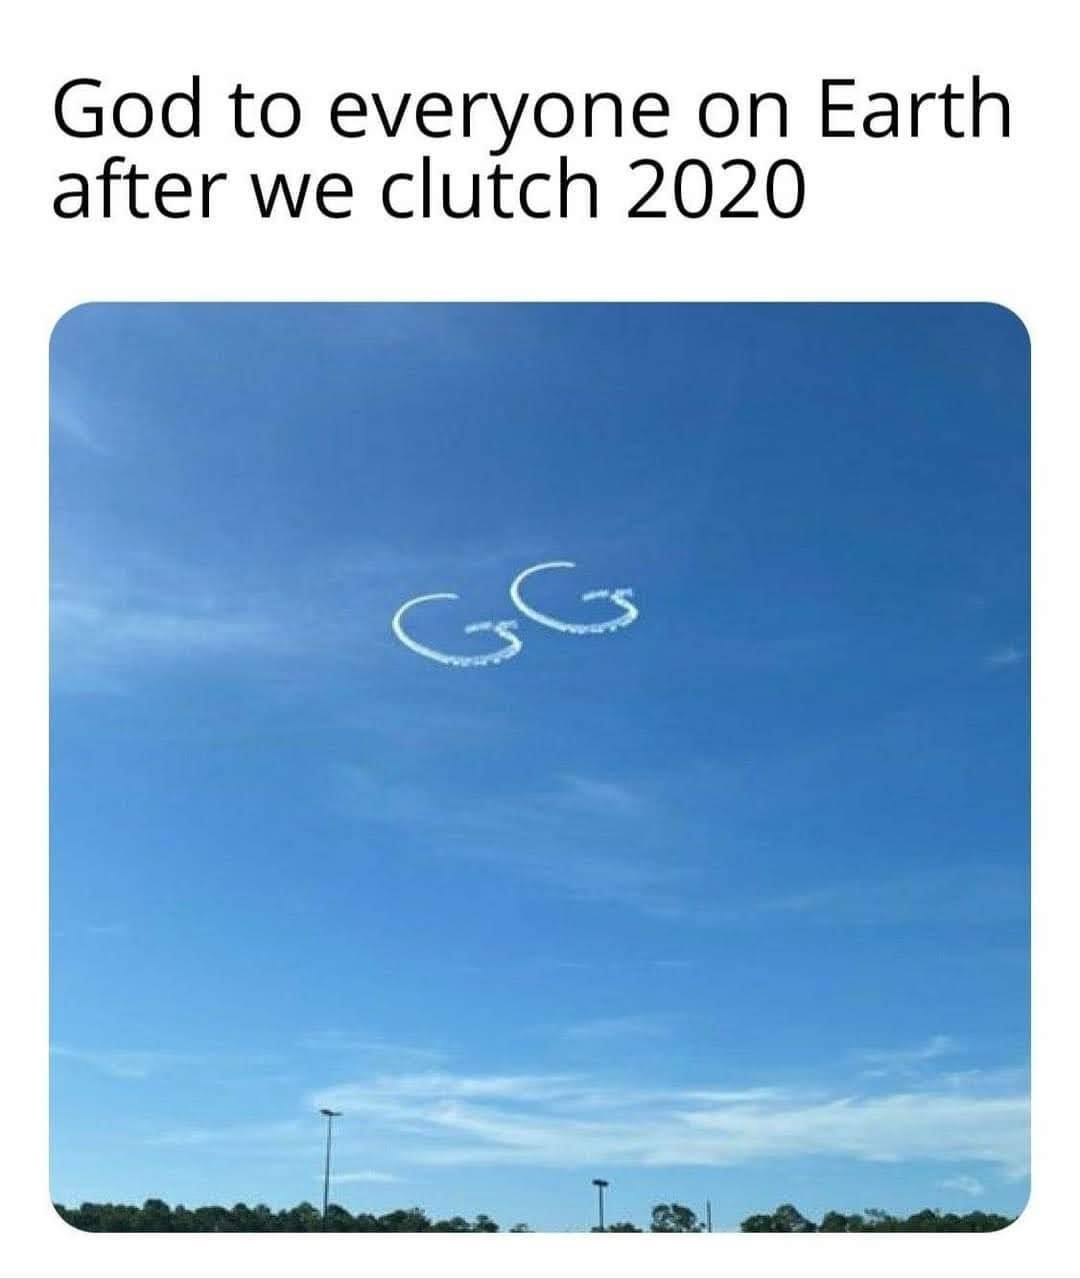 funny video game memes - God to everyone on Earth after we clutch 2020 Gg